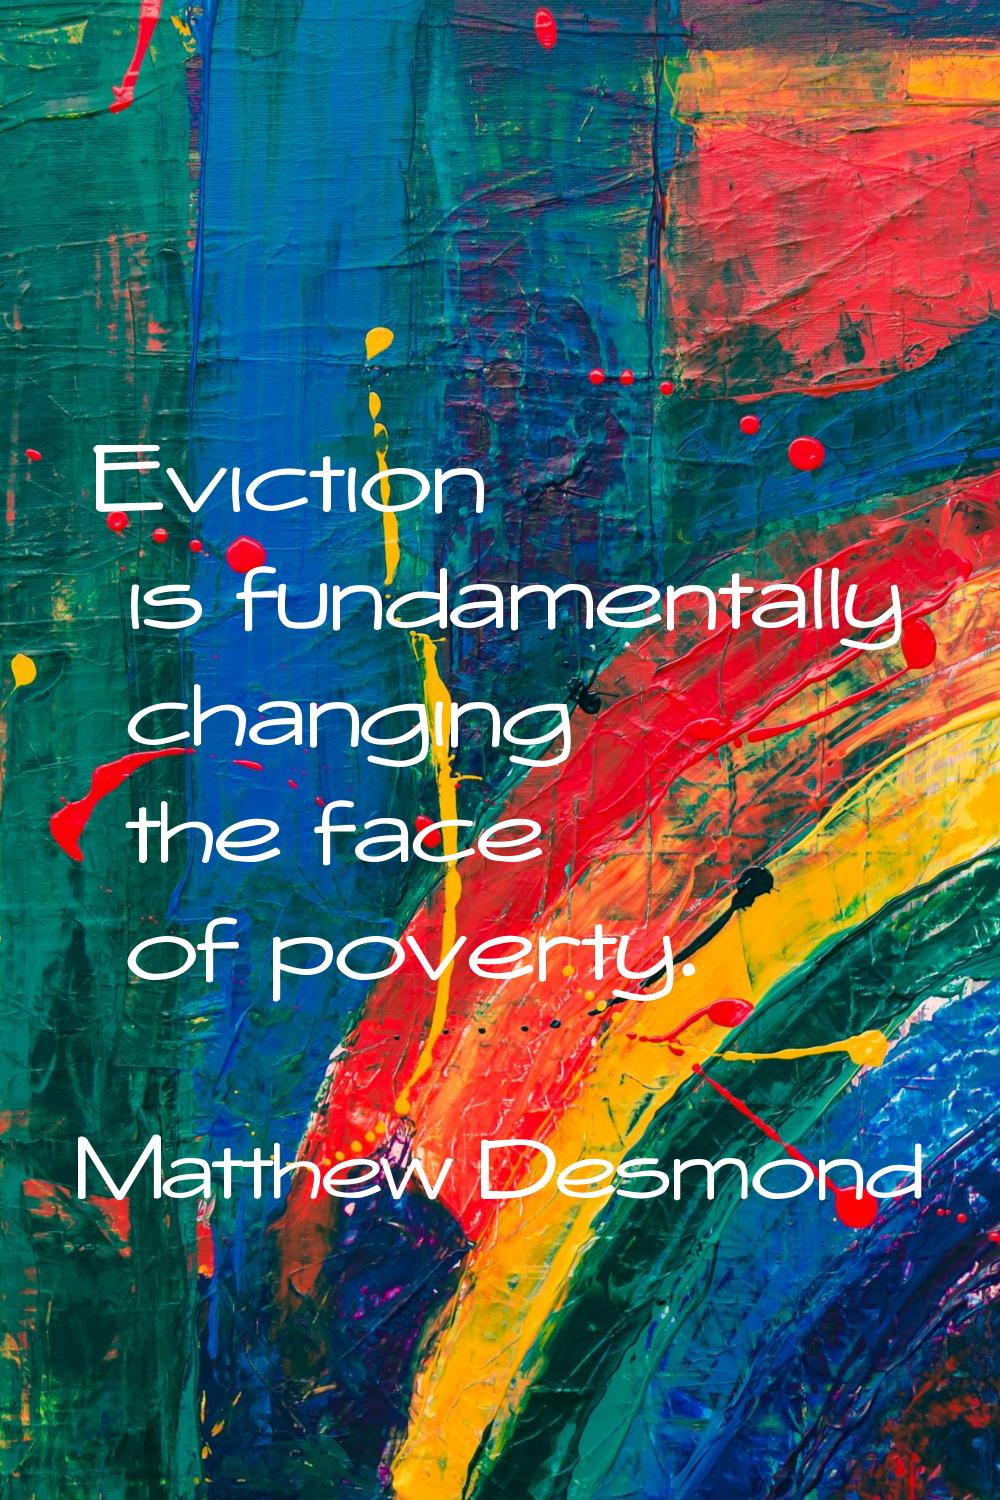 Eviction is fundamentally changing the face of poverty.